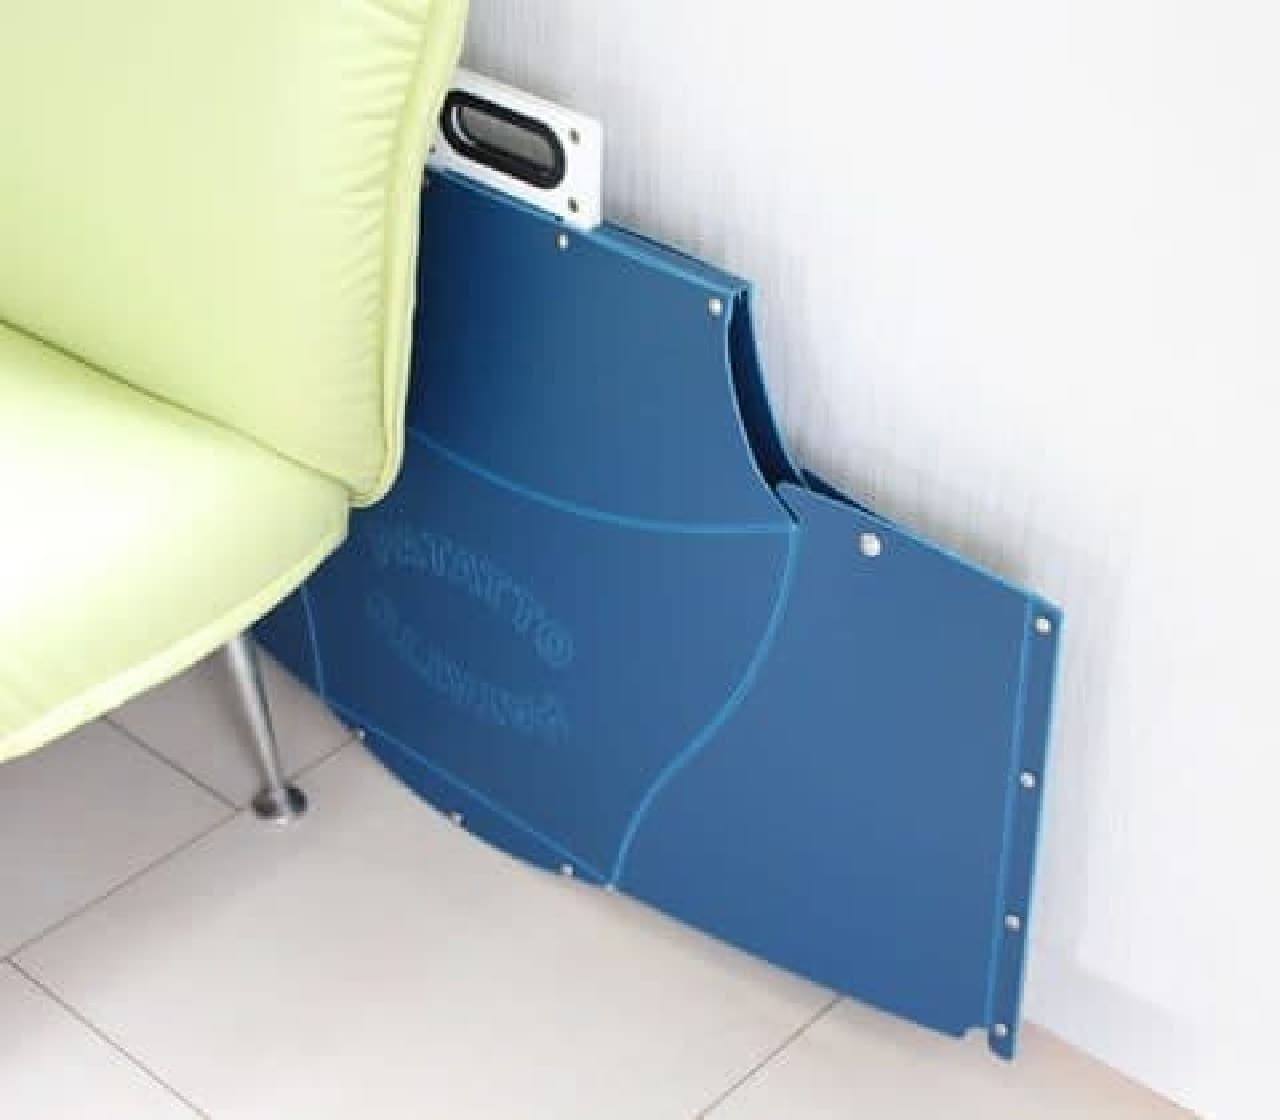 Folding table "PATATTO TABLE"